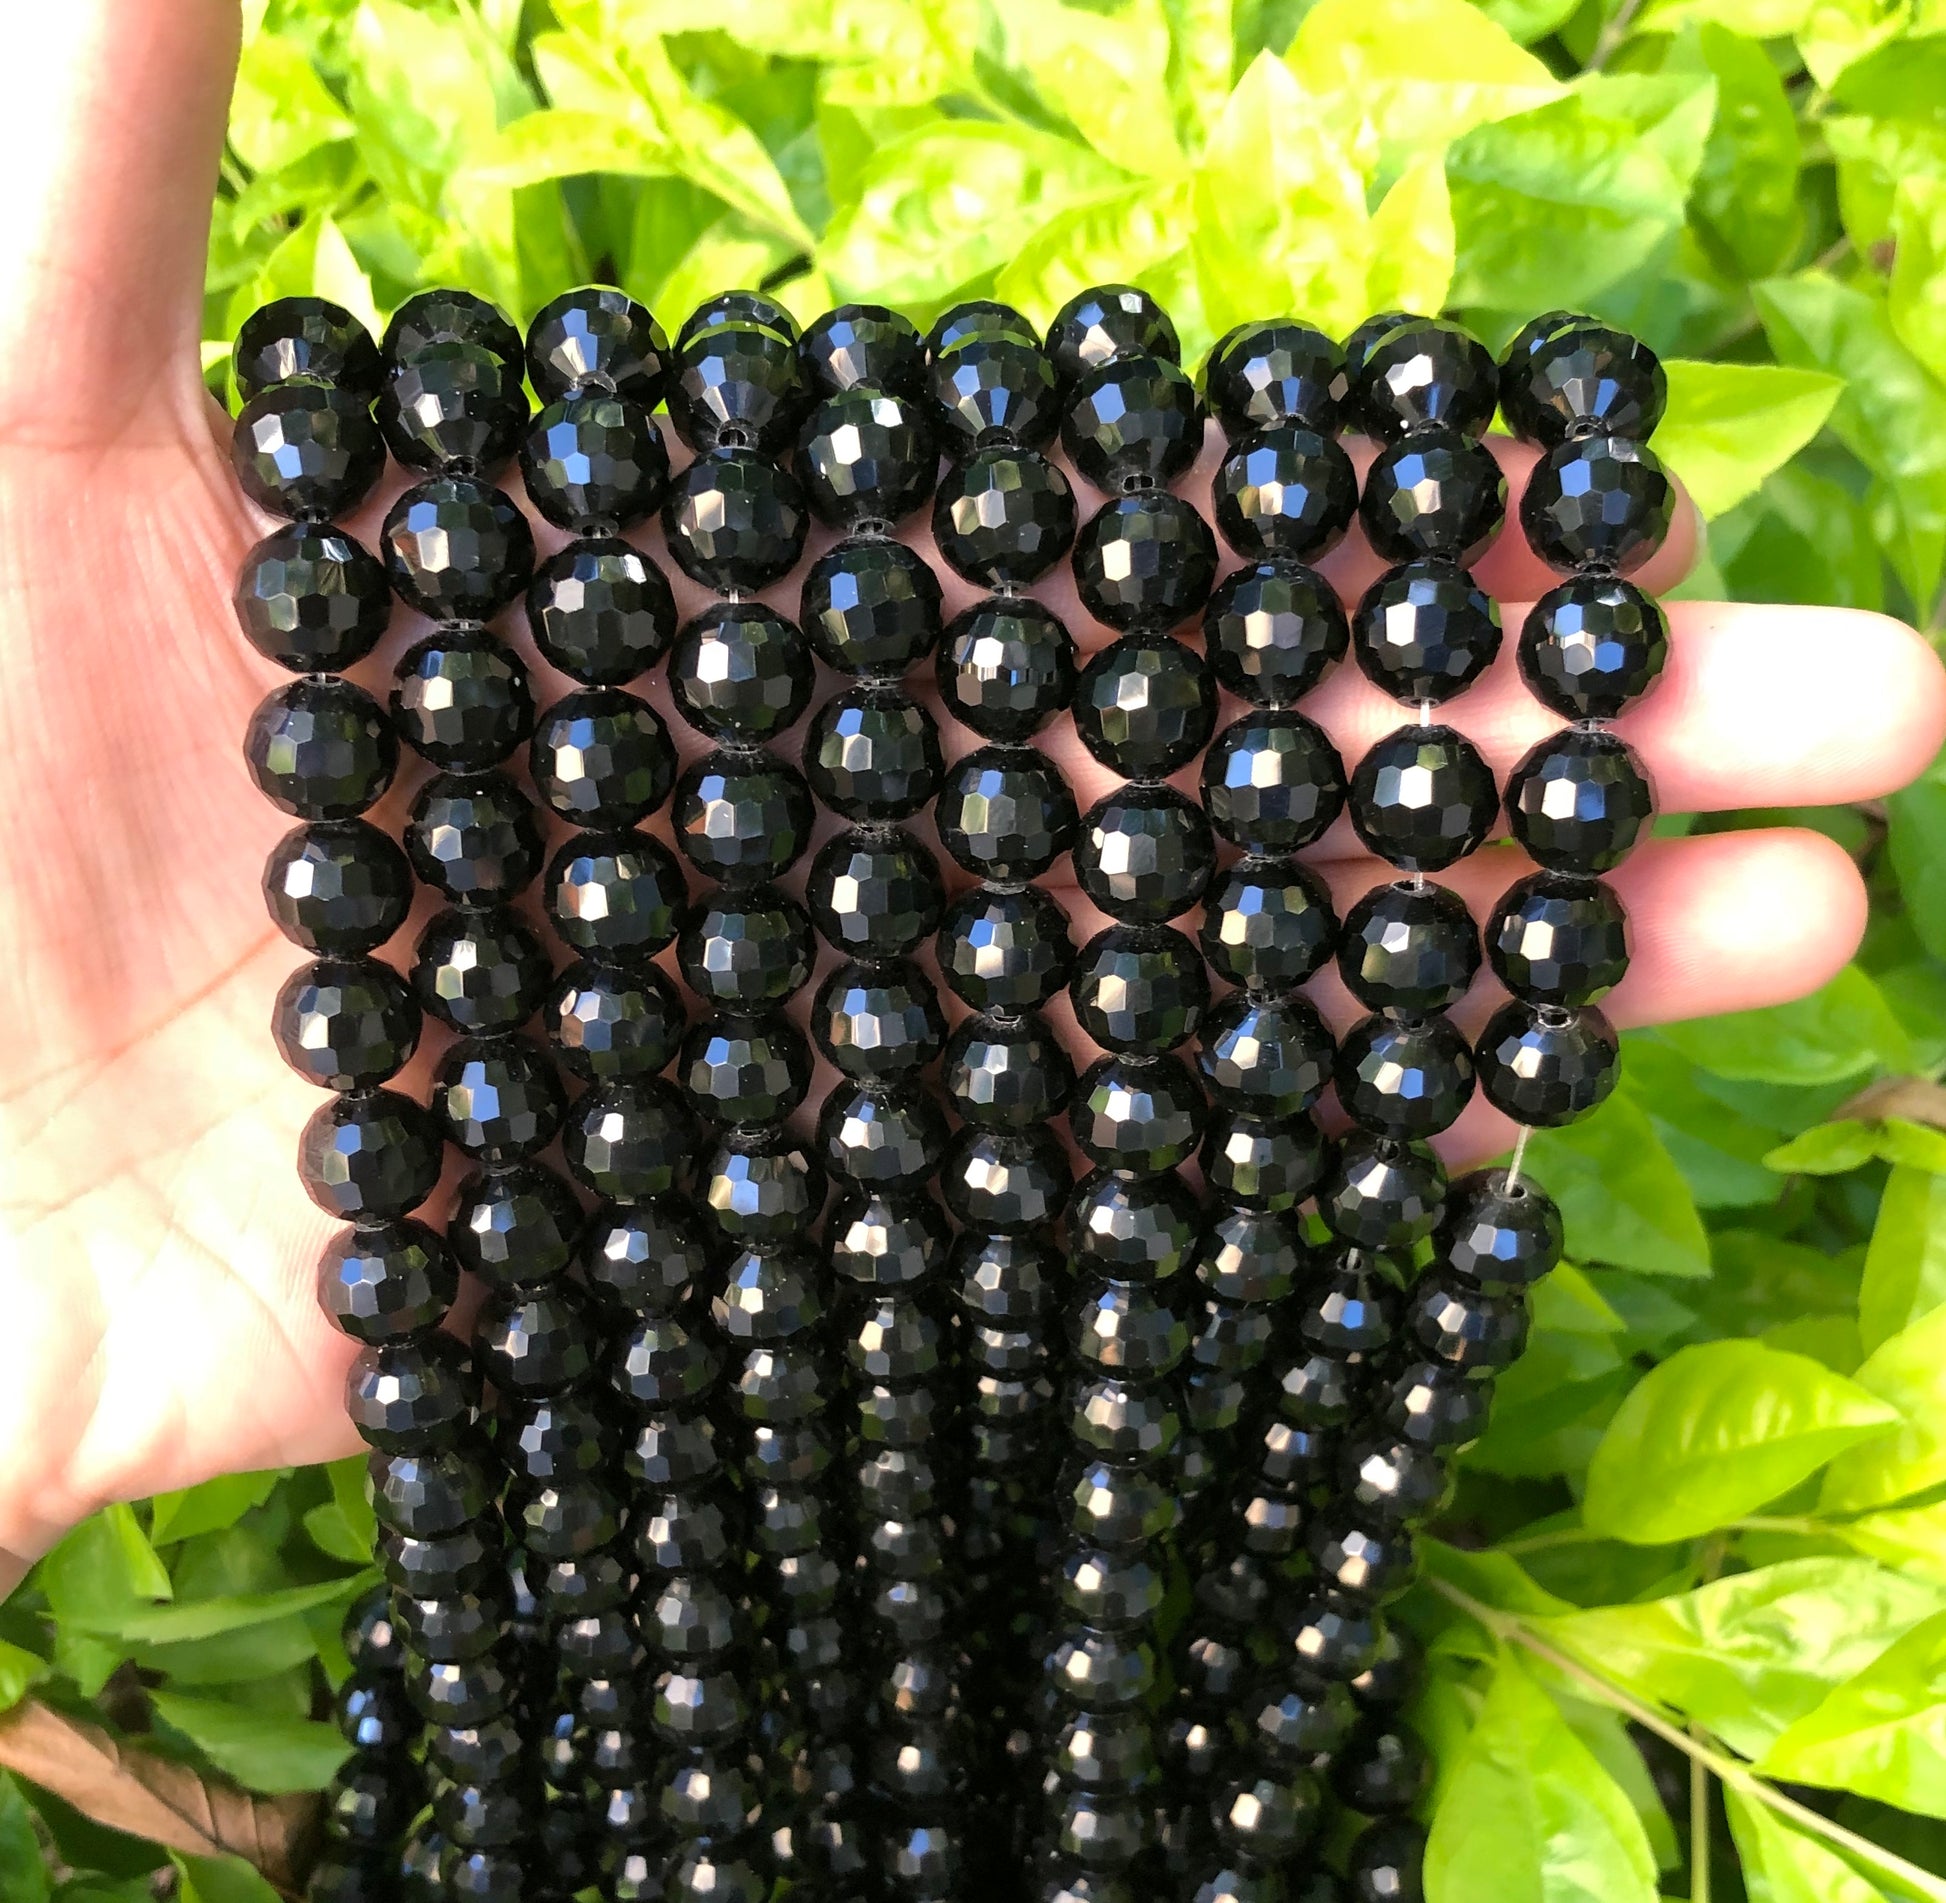 2 Strands/lot 8mm/10mm Black 96 Faceted Glass Beads Glass Beads Faceted Glass Beads Charms Beads Beyond